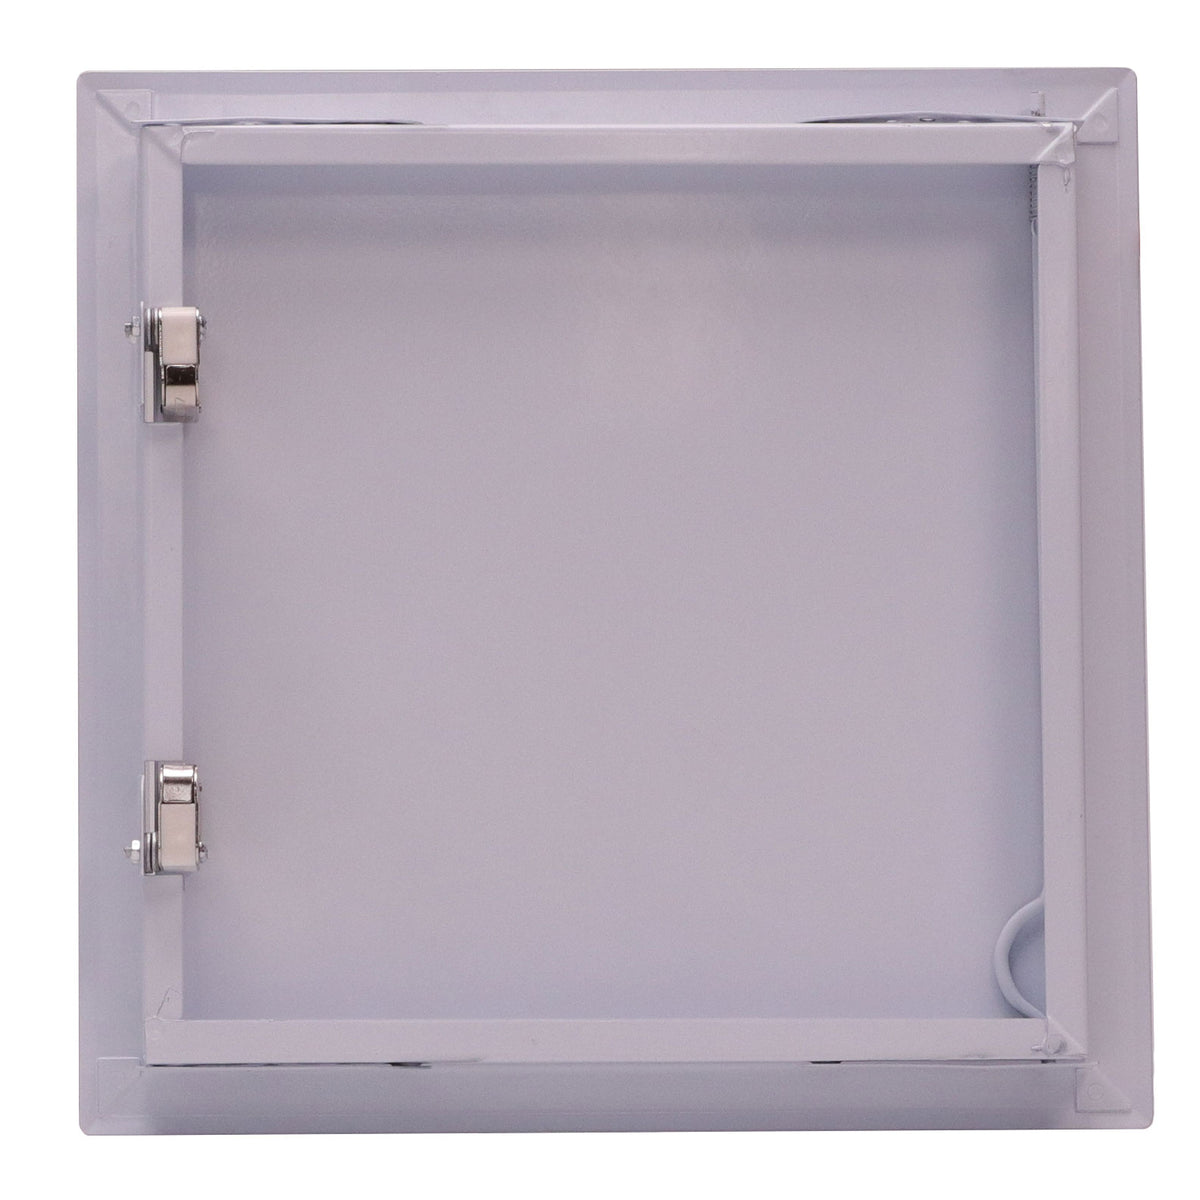 10&quot; X 10&quot; Universal Aluminum Access Panel Door For Wall / Ceiling Application (Push-Lock) With Solid Frame - [Outer Dimensions: 11&quot; Width X 11&quot; Height]